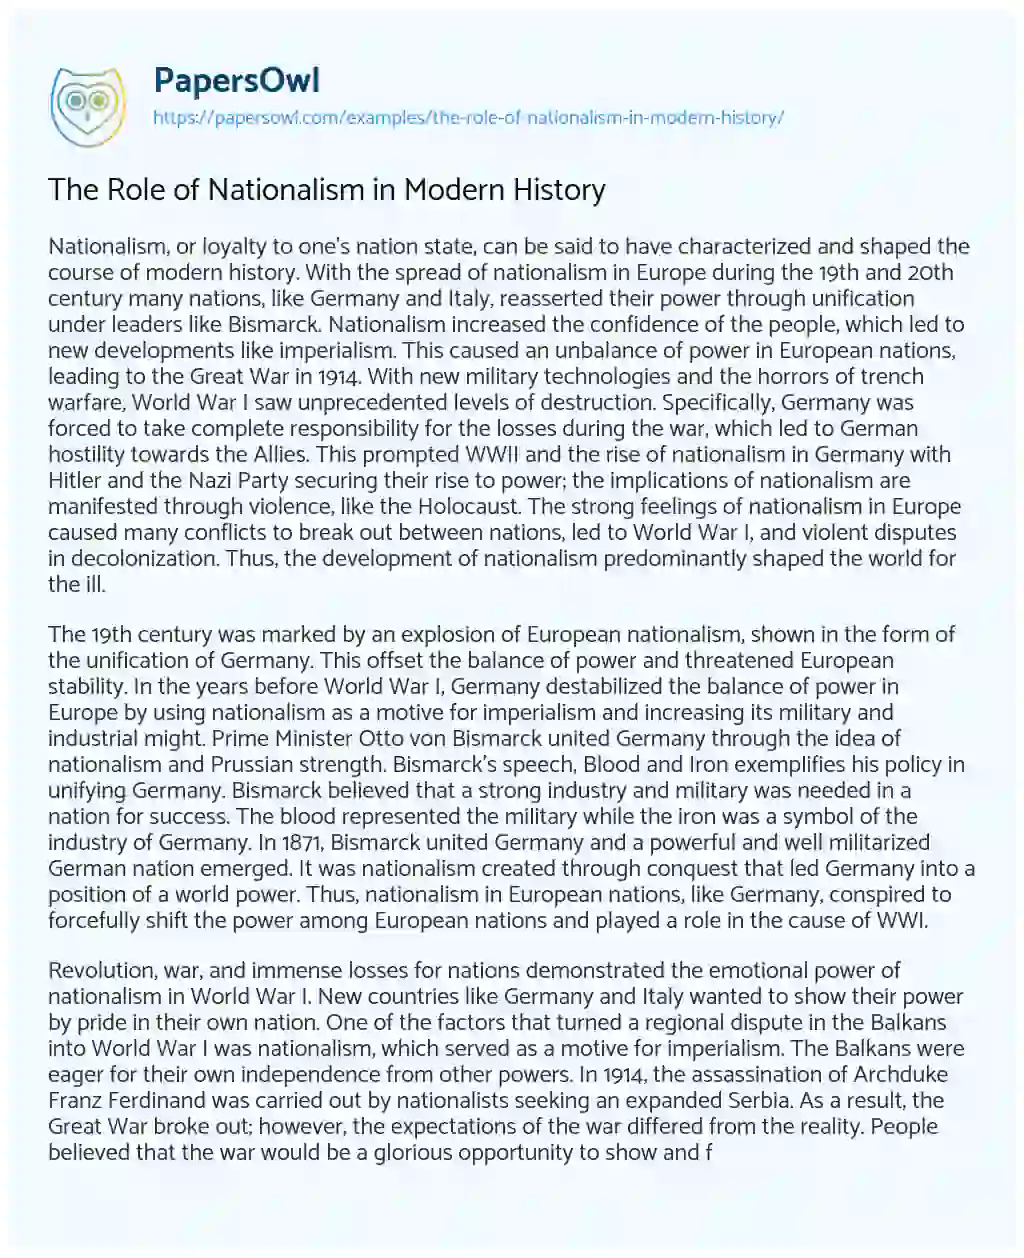 Essay on The Role of Nationalism in Modern History